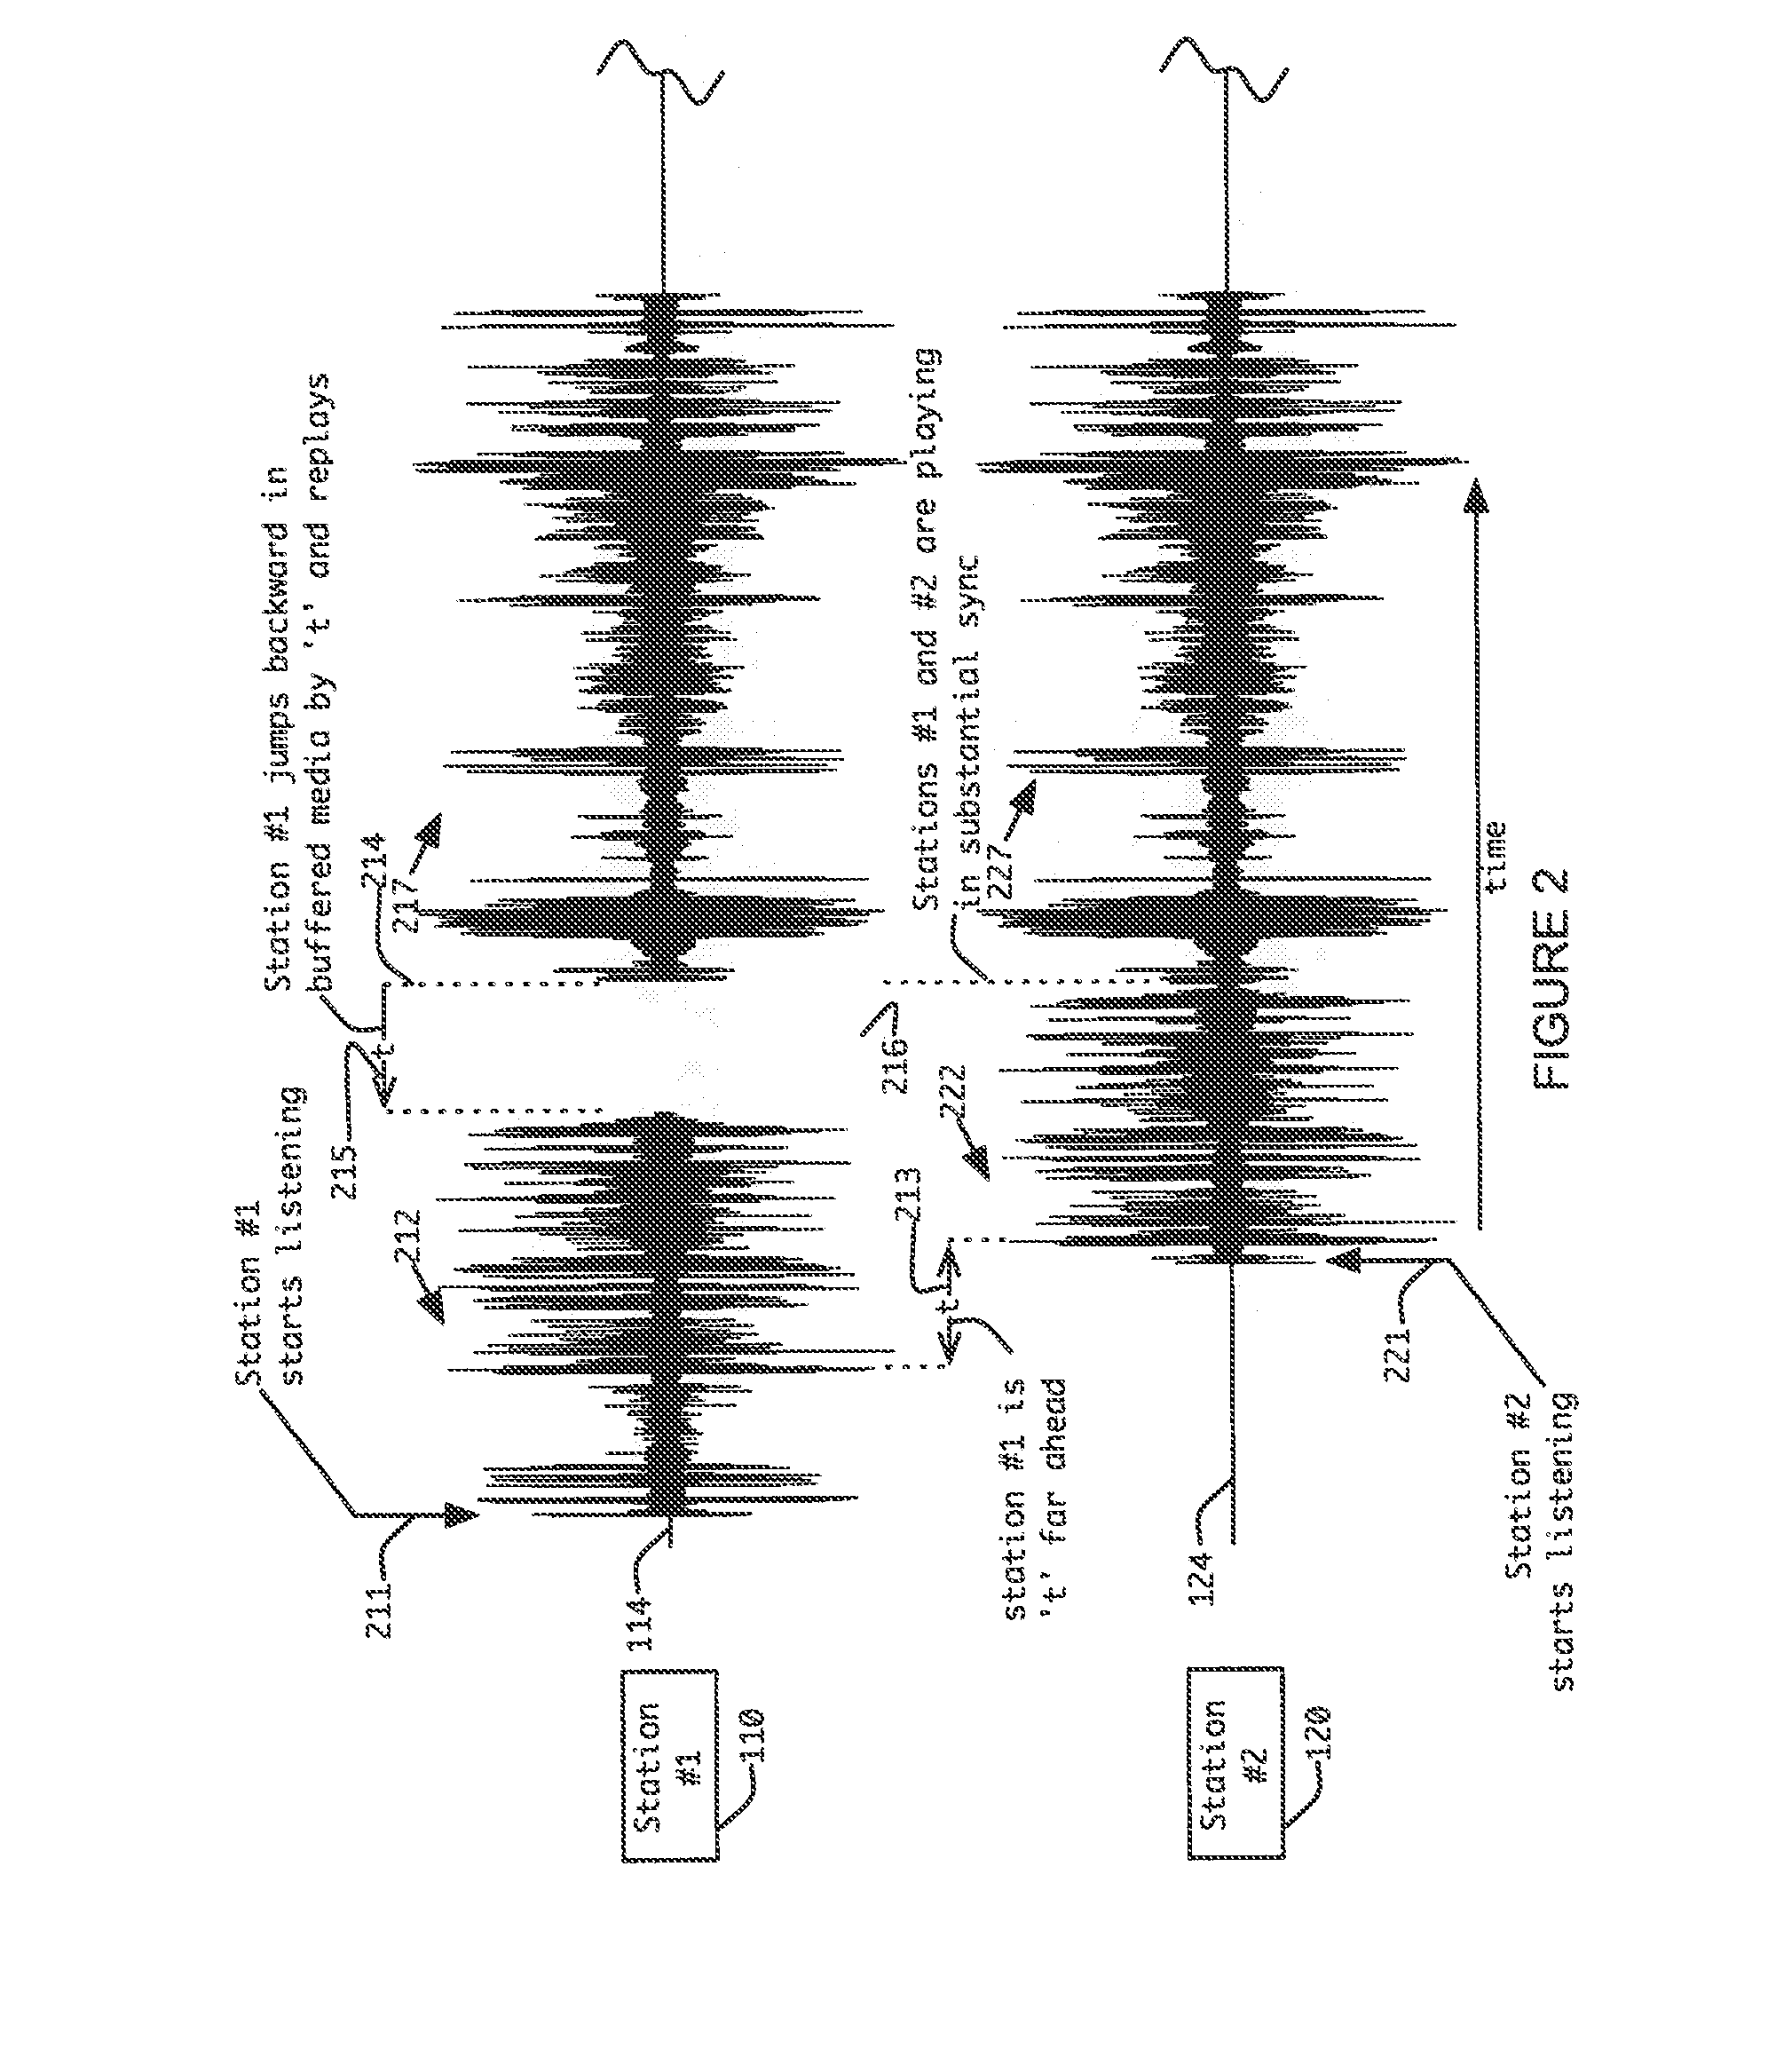 System and method to assist synchronization of distributed play out of content